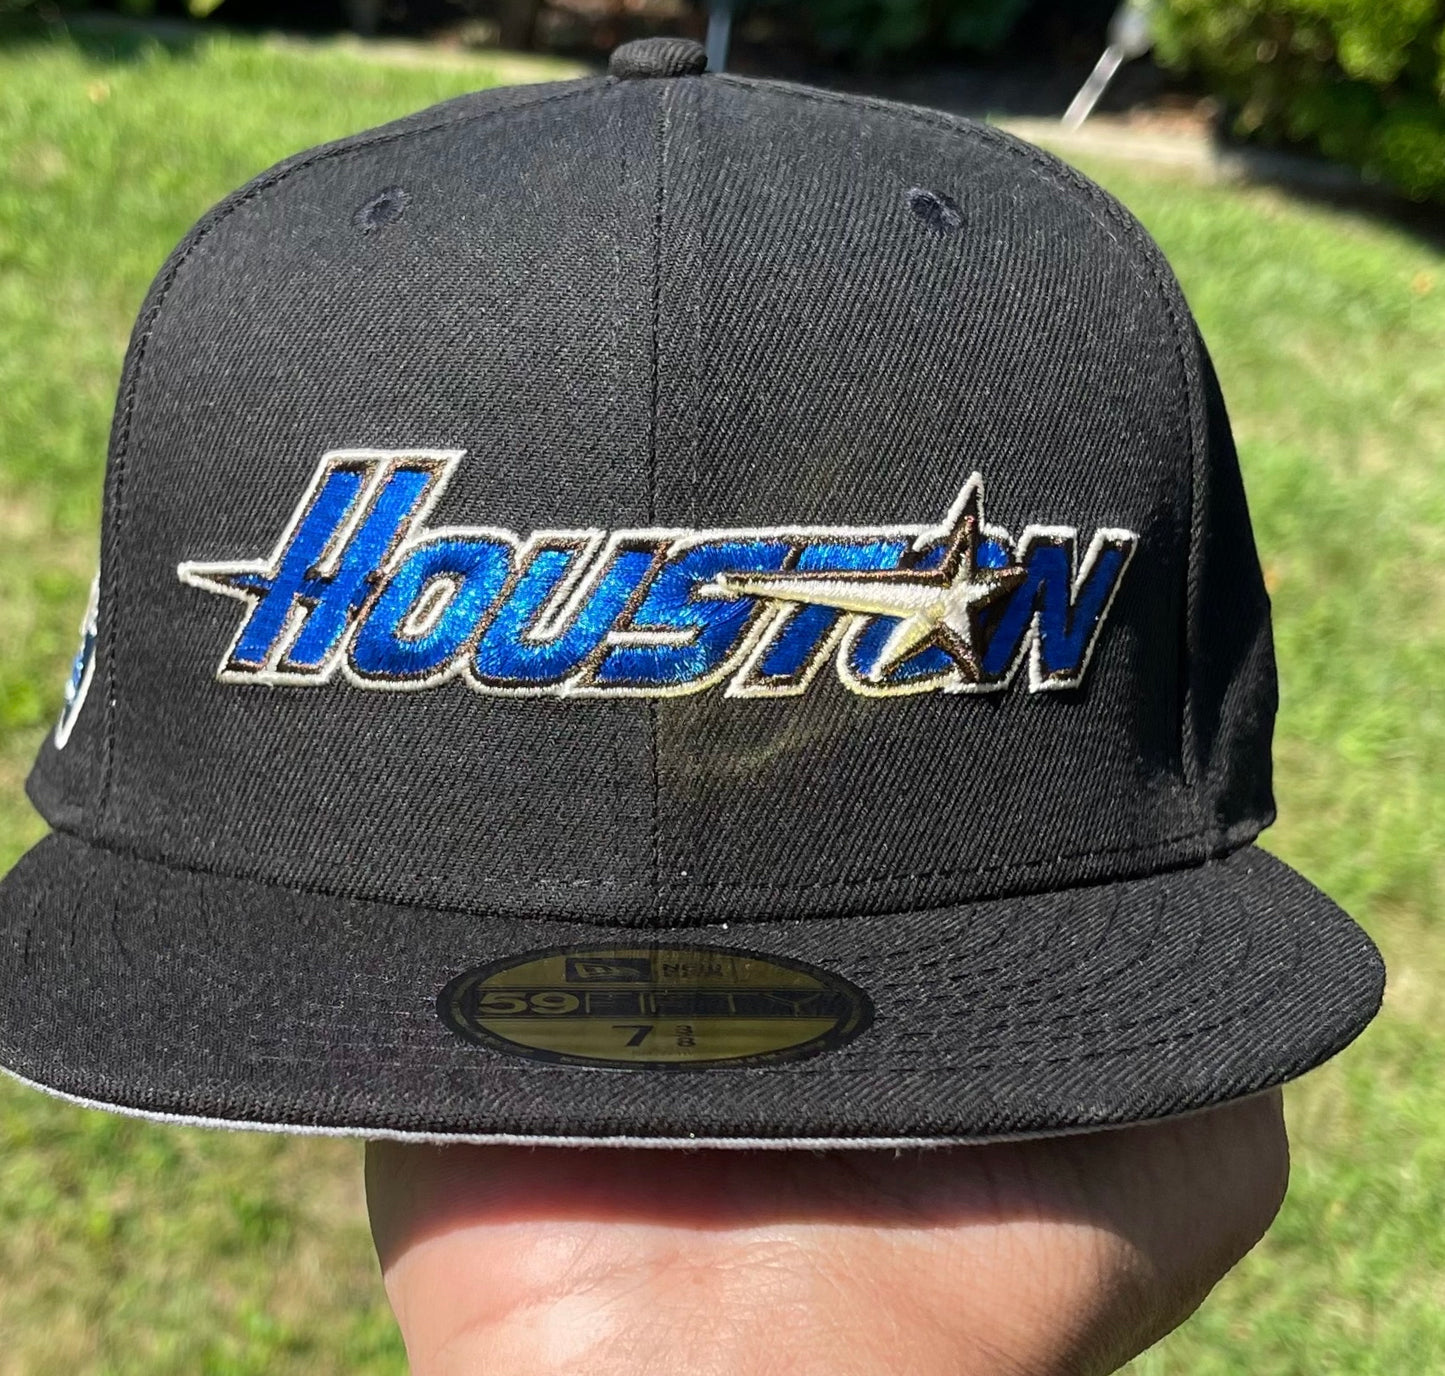 Houston Astros 35 Great Years Side Patch Fitted Hat ((Black/Blue/Gray) New Era 5950